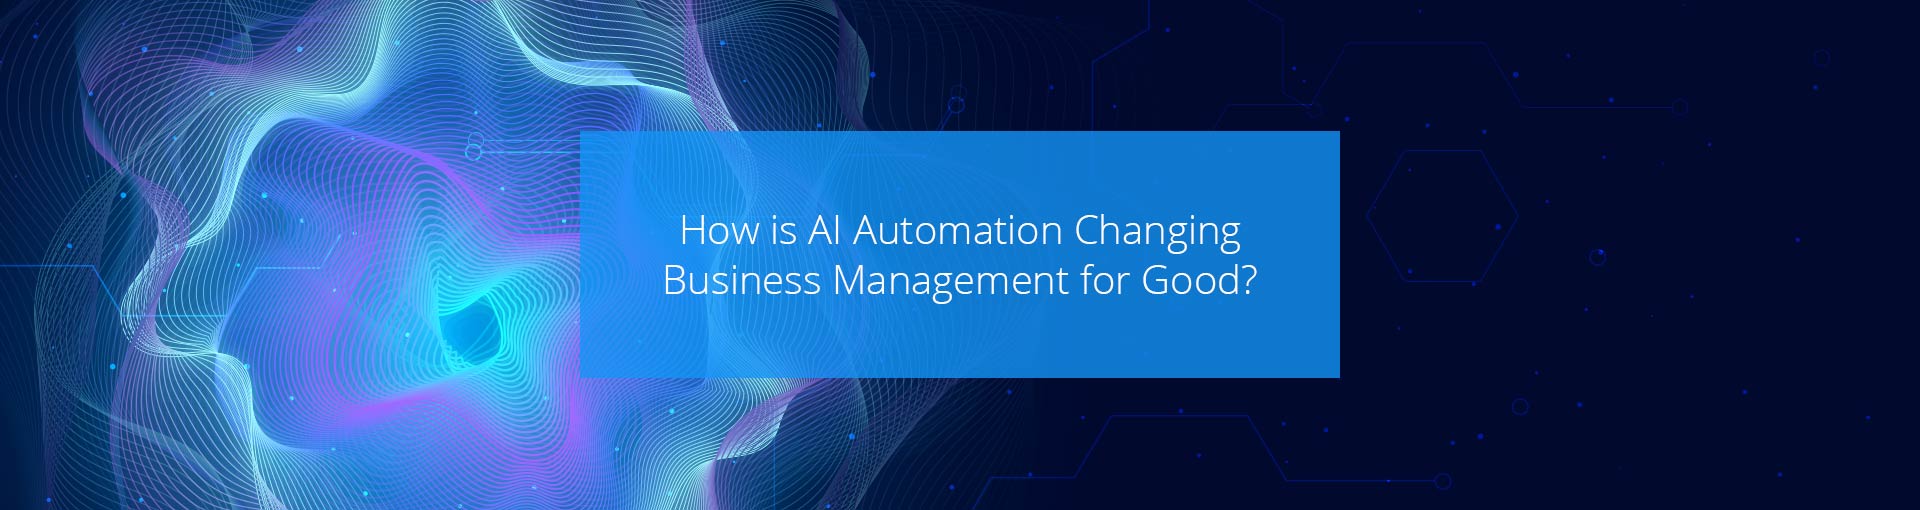 How is AI Automation Changing Business Management for Good? Featured Image